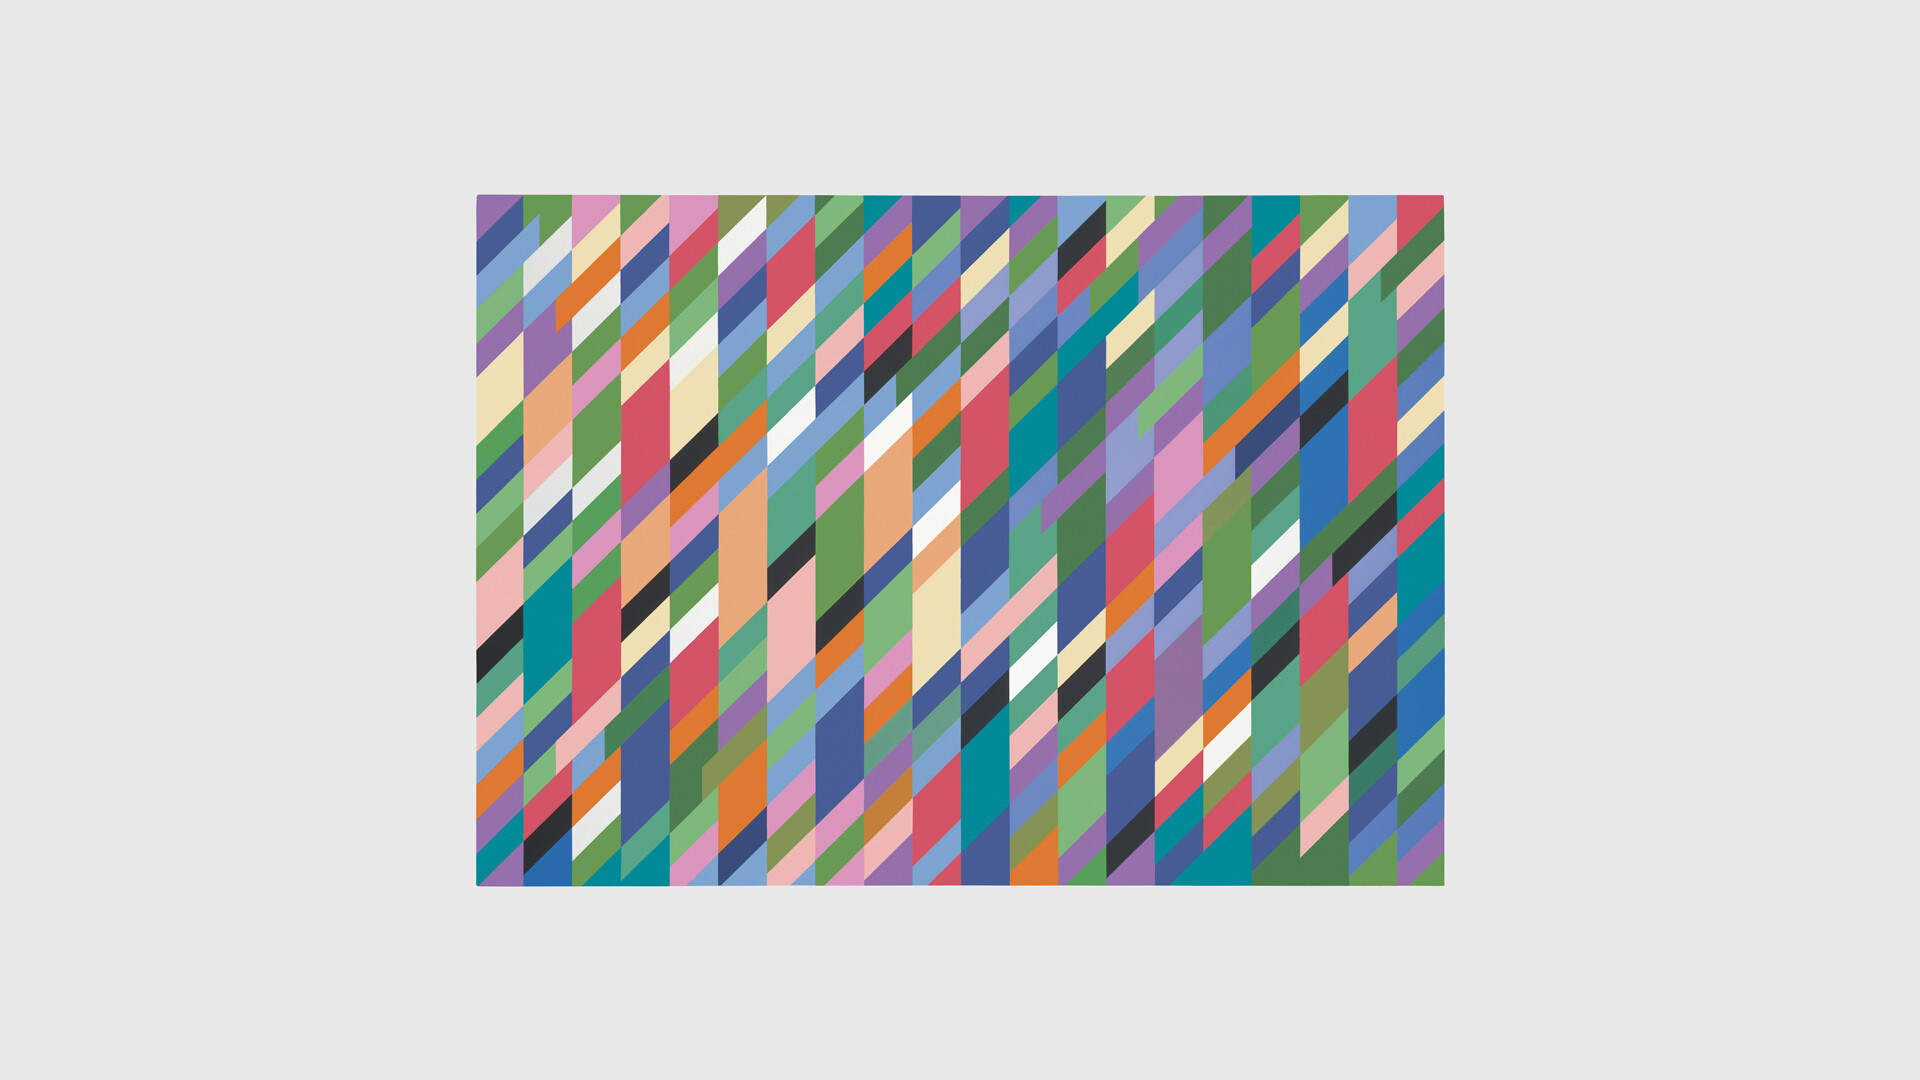 A painting by Bridget Riley, titled High Sky, dated 1991. 